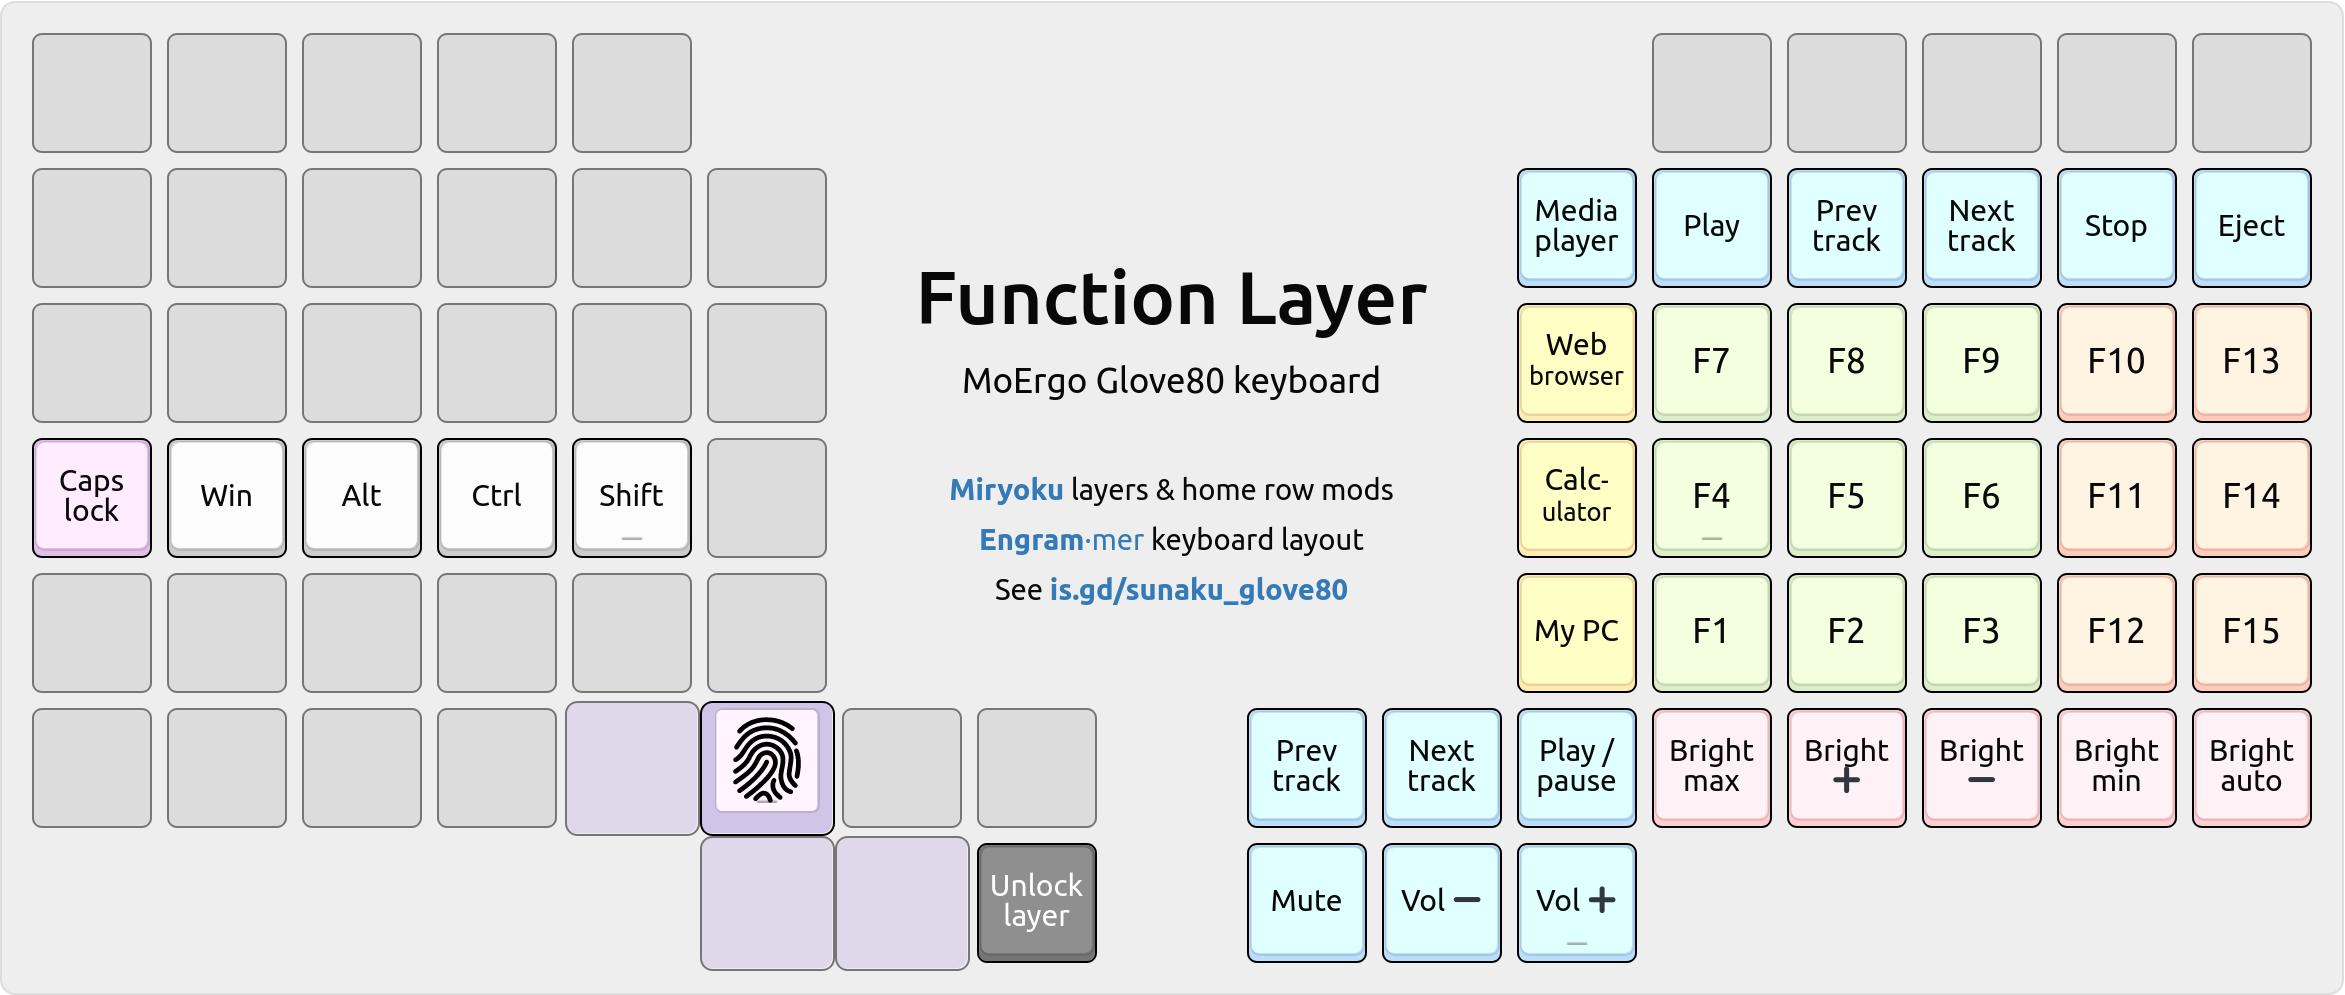 Function layer